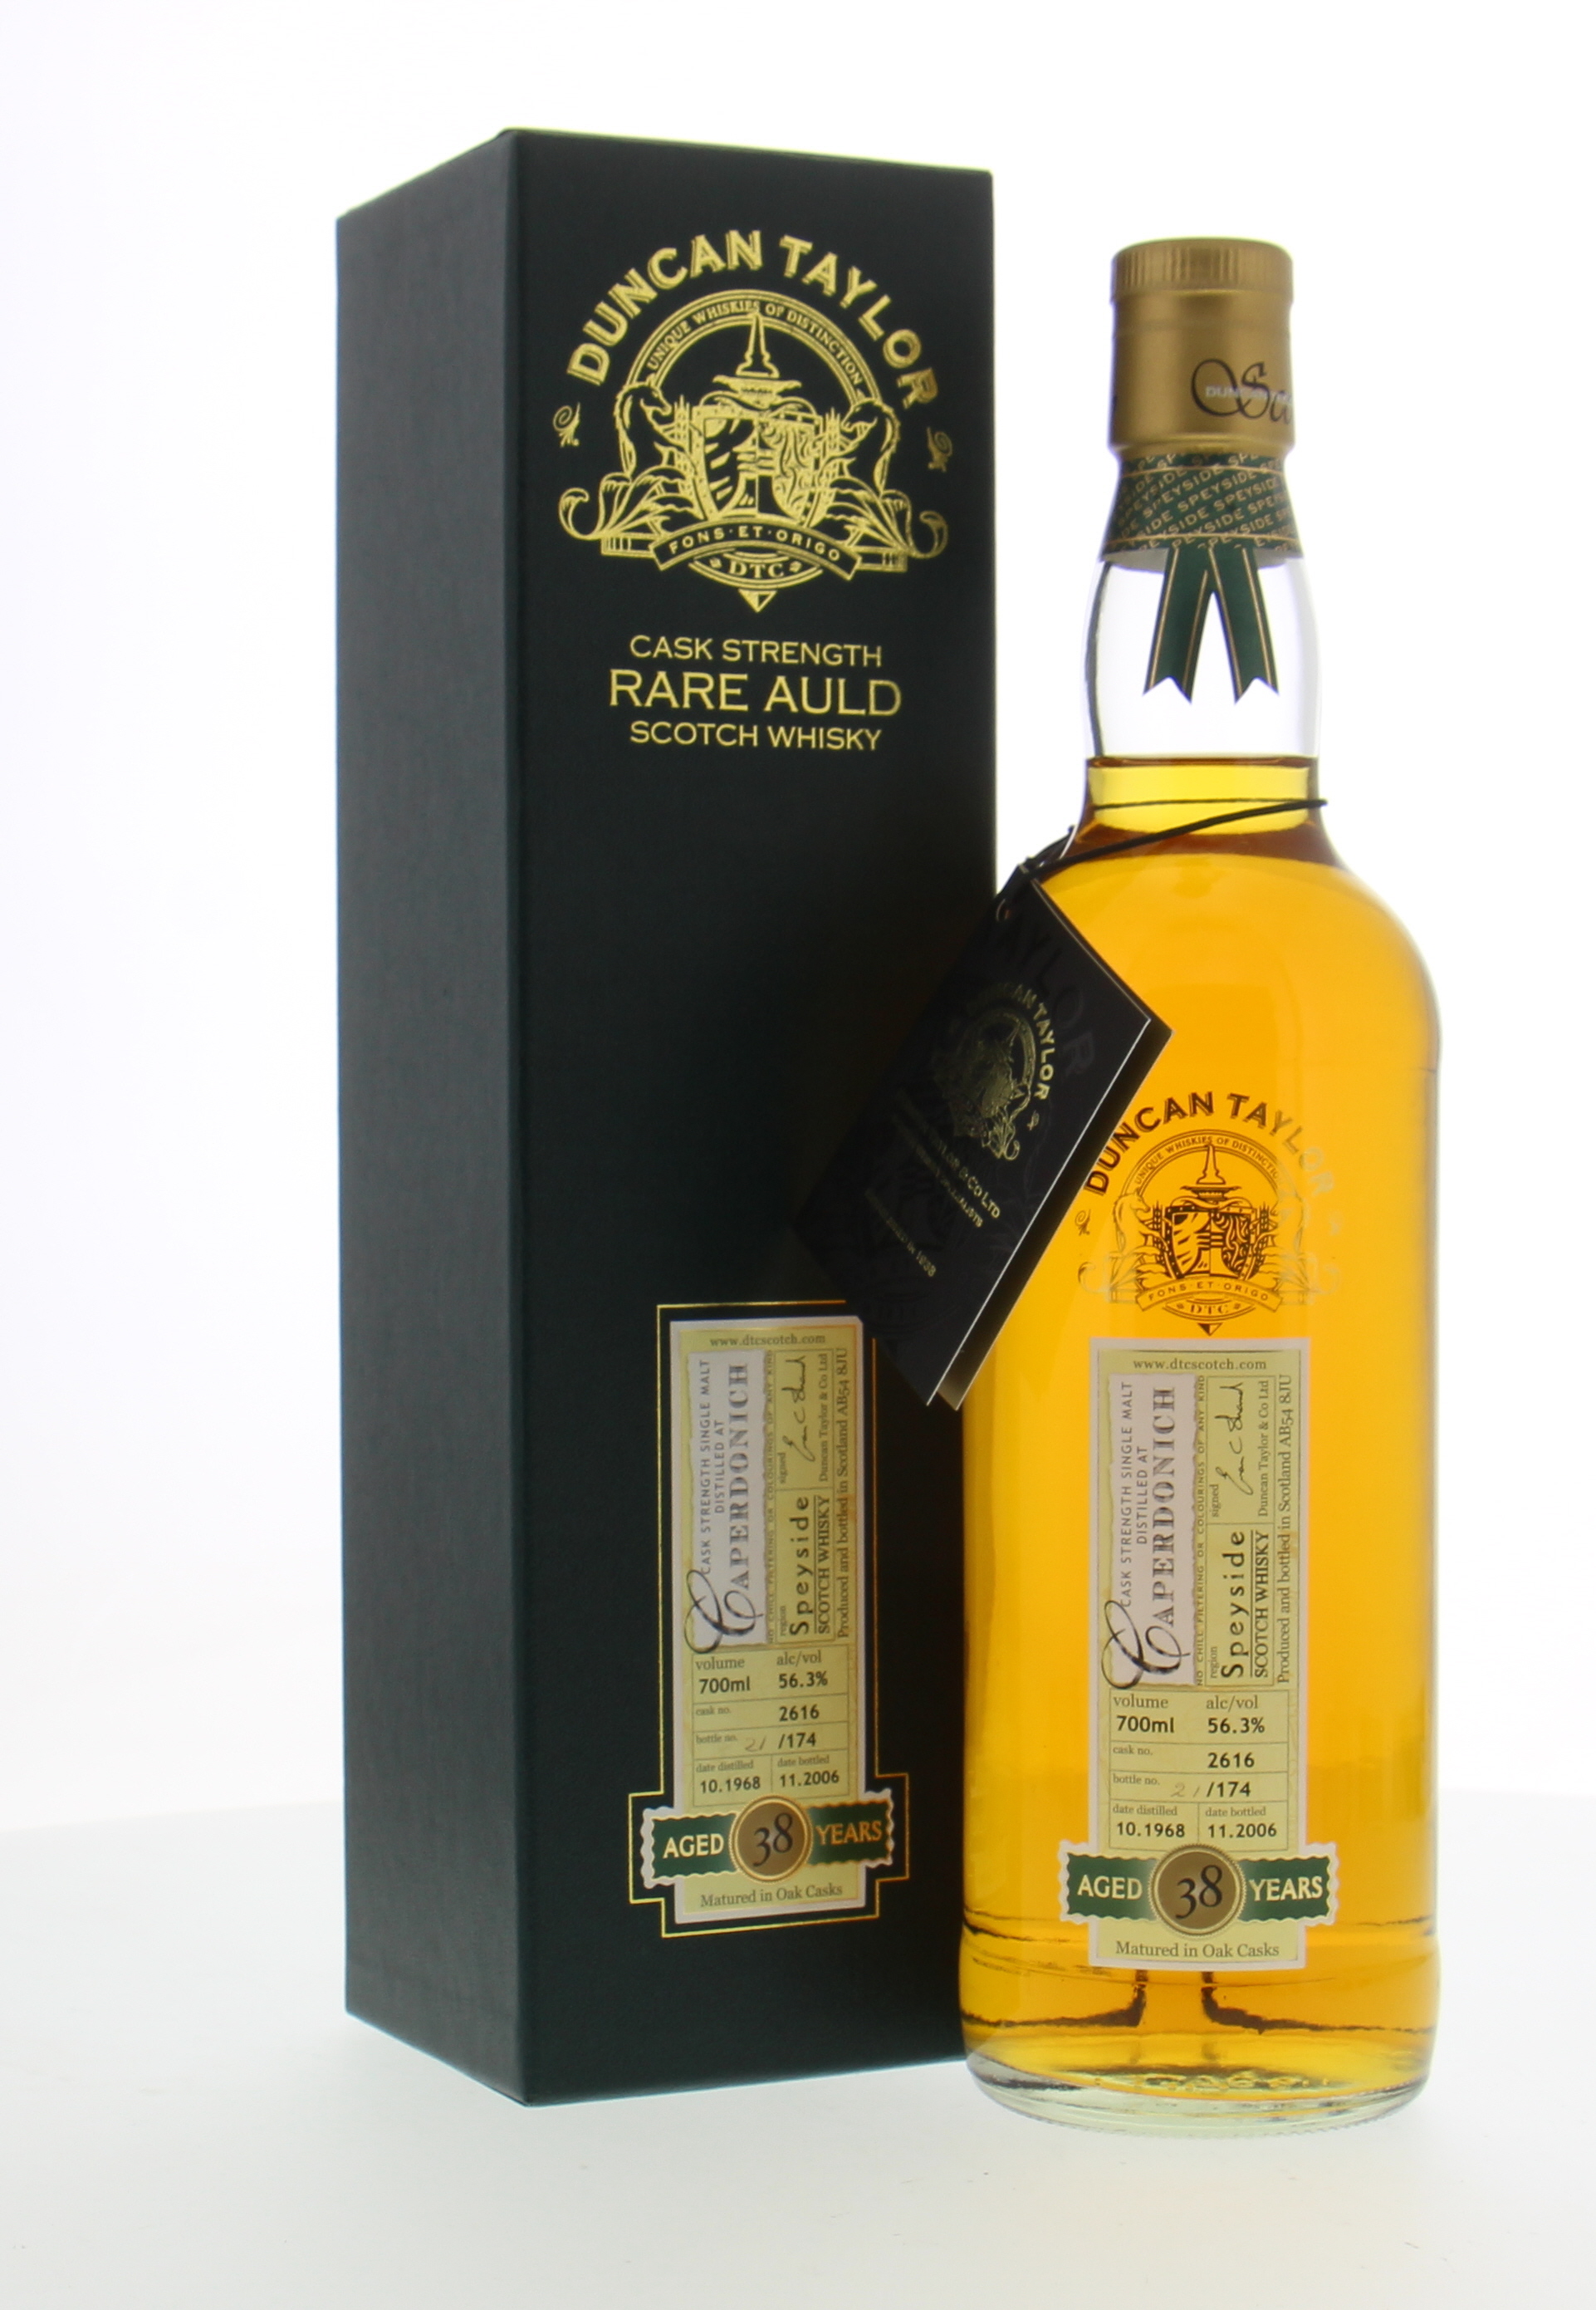 Caperdonich - 38 Years Old Duncan Taylor Rare Auld Cask 2616 56.3% 1968 In orginal Box